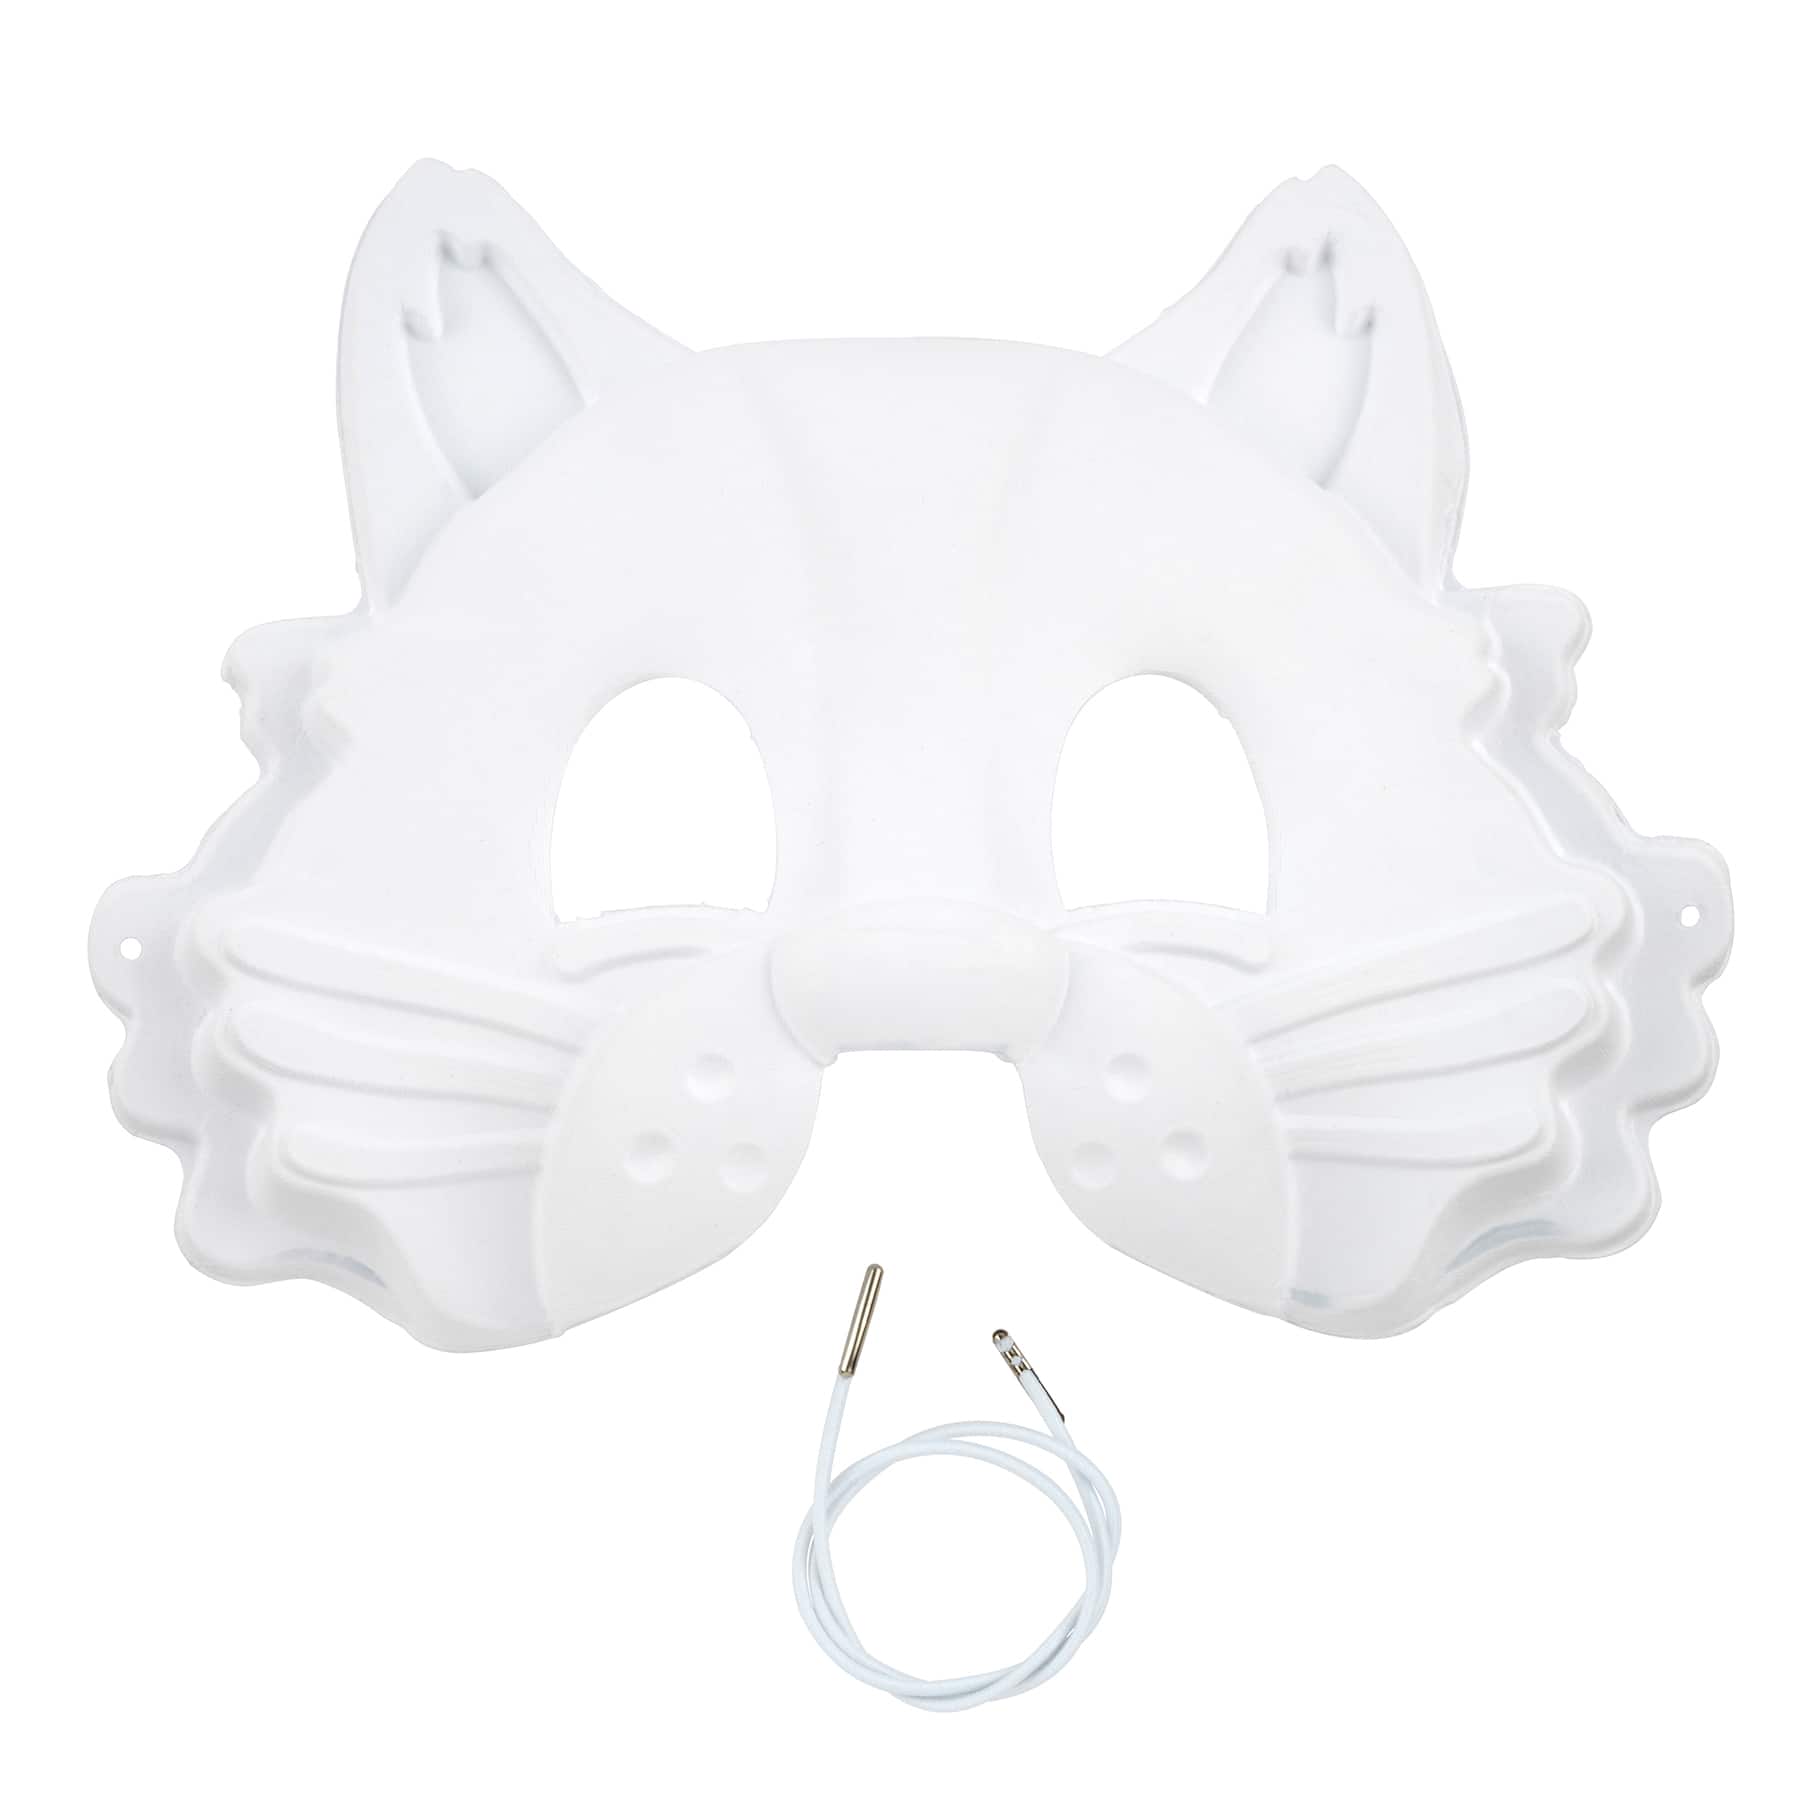 DIY Paintable White Cat Mask for Halloween Cosplay Animal Themed Parties